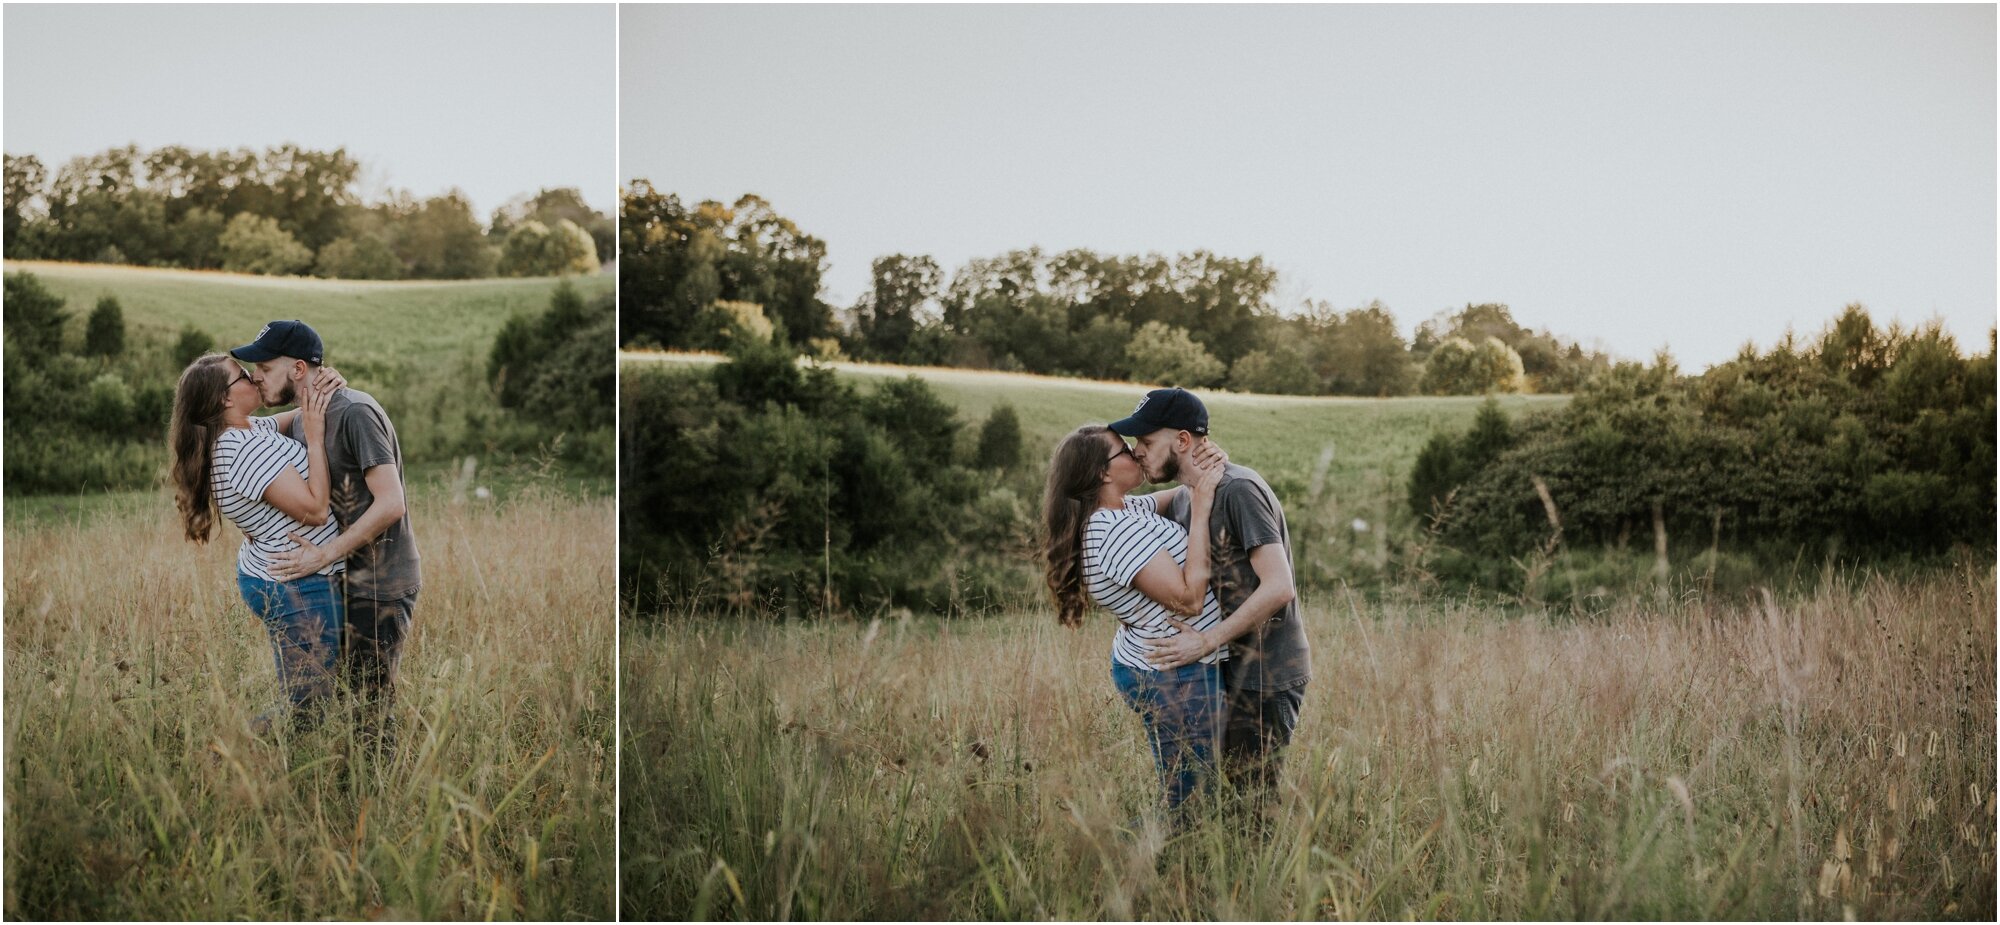 kingsport-tennessee-backyard-pond-bays-mountain-summer-engagement-session_0019.jpg